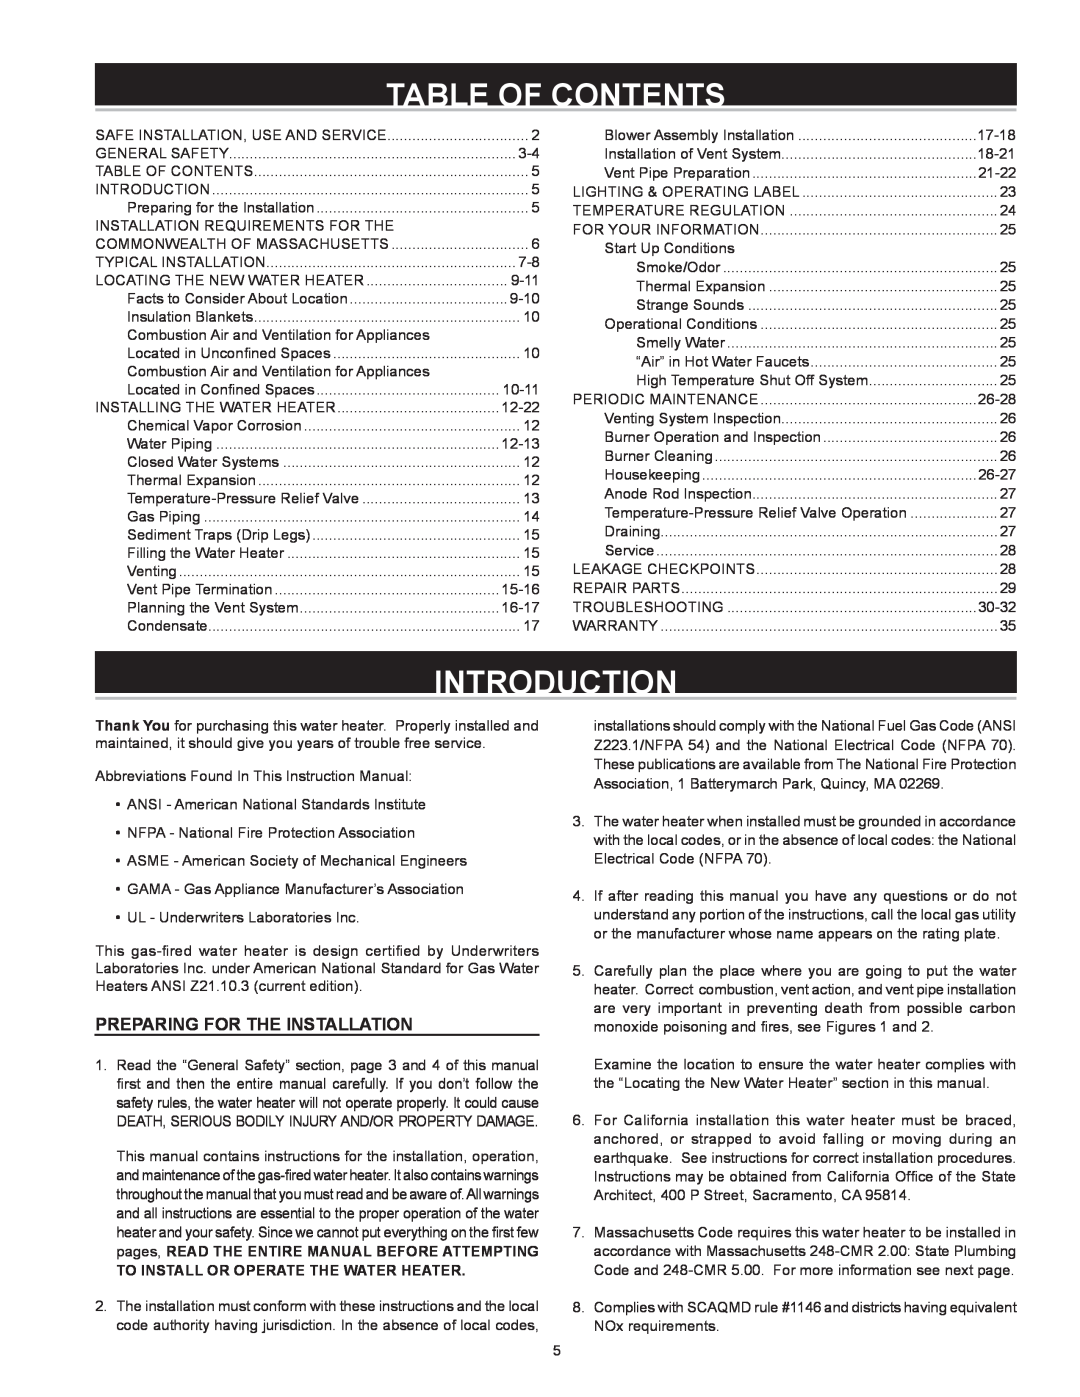 State Industries GS675HRVIT, GS675YRVIT instruction manual Table Of Contents, Introduction, Preparing for the Installation 